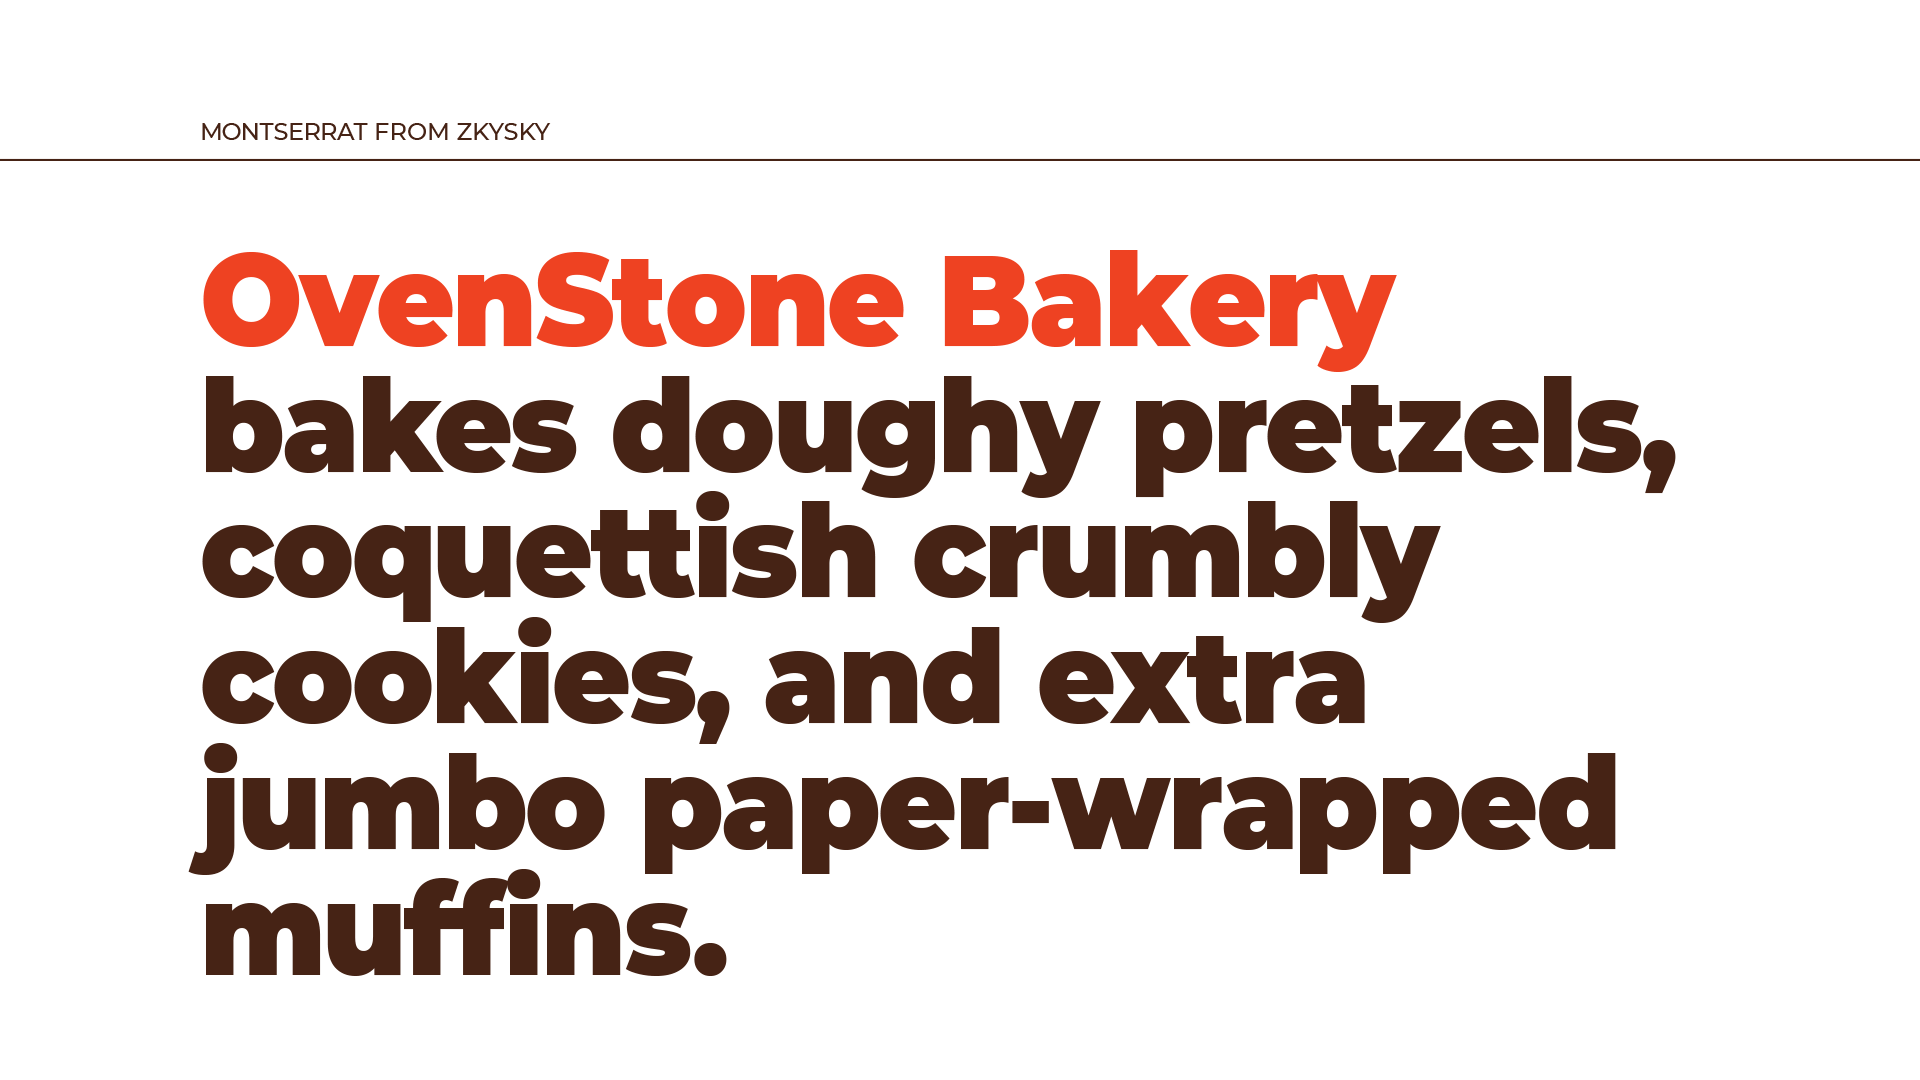 Montserrat Type Specimen Pangram: OvenStone Bakery bakes doughy pretzels, coquettish crumbly cookies, and extra jumbo paper-wrapped muffins.